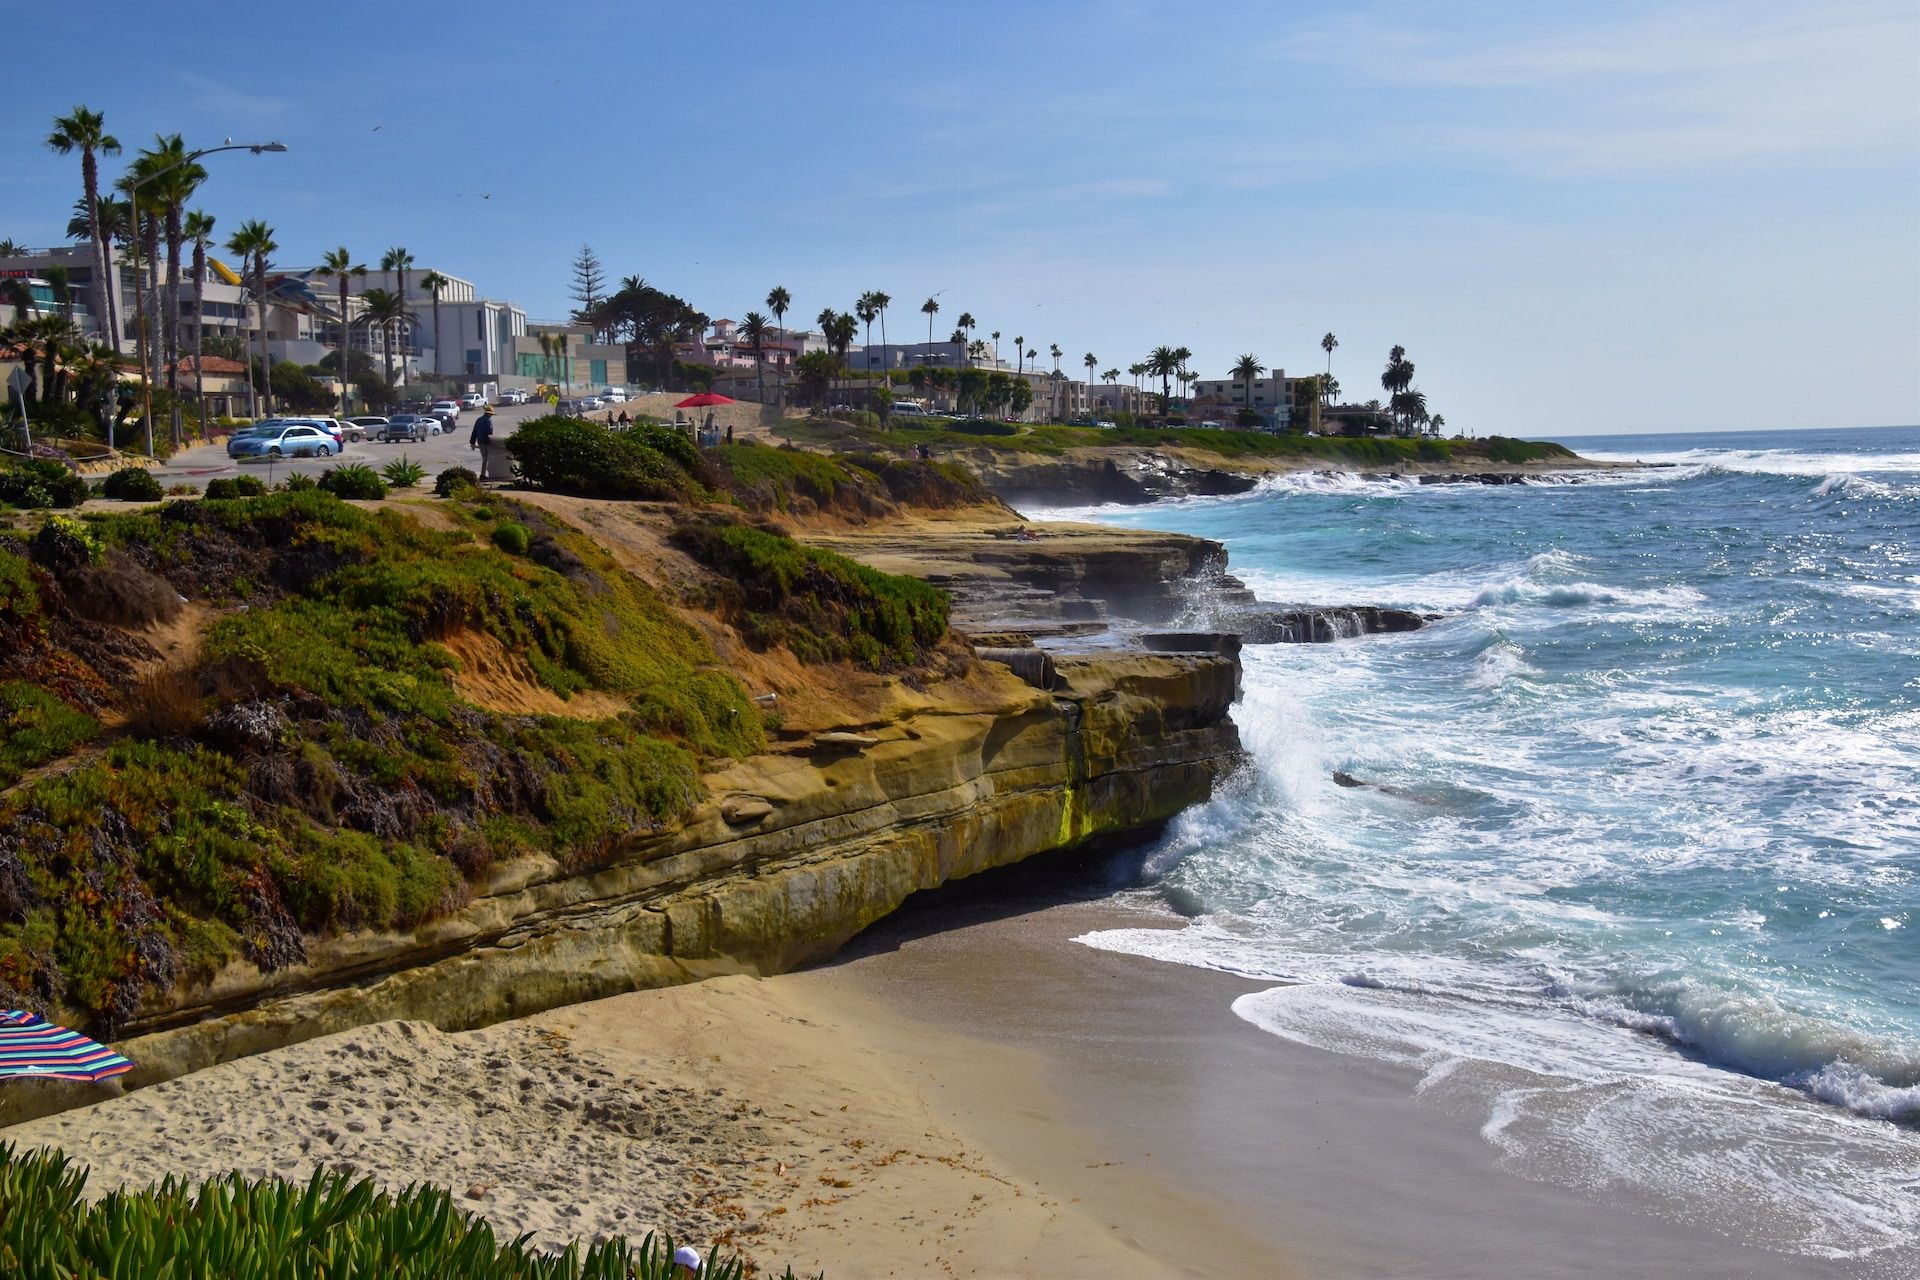 La Jolla Cove from a viewpoint in San Diego, California 